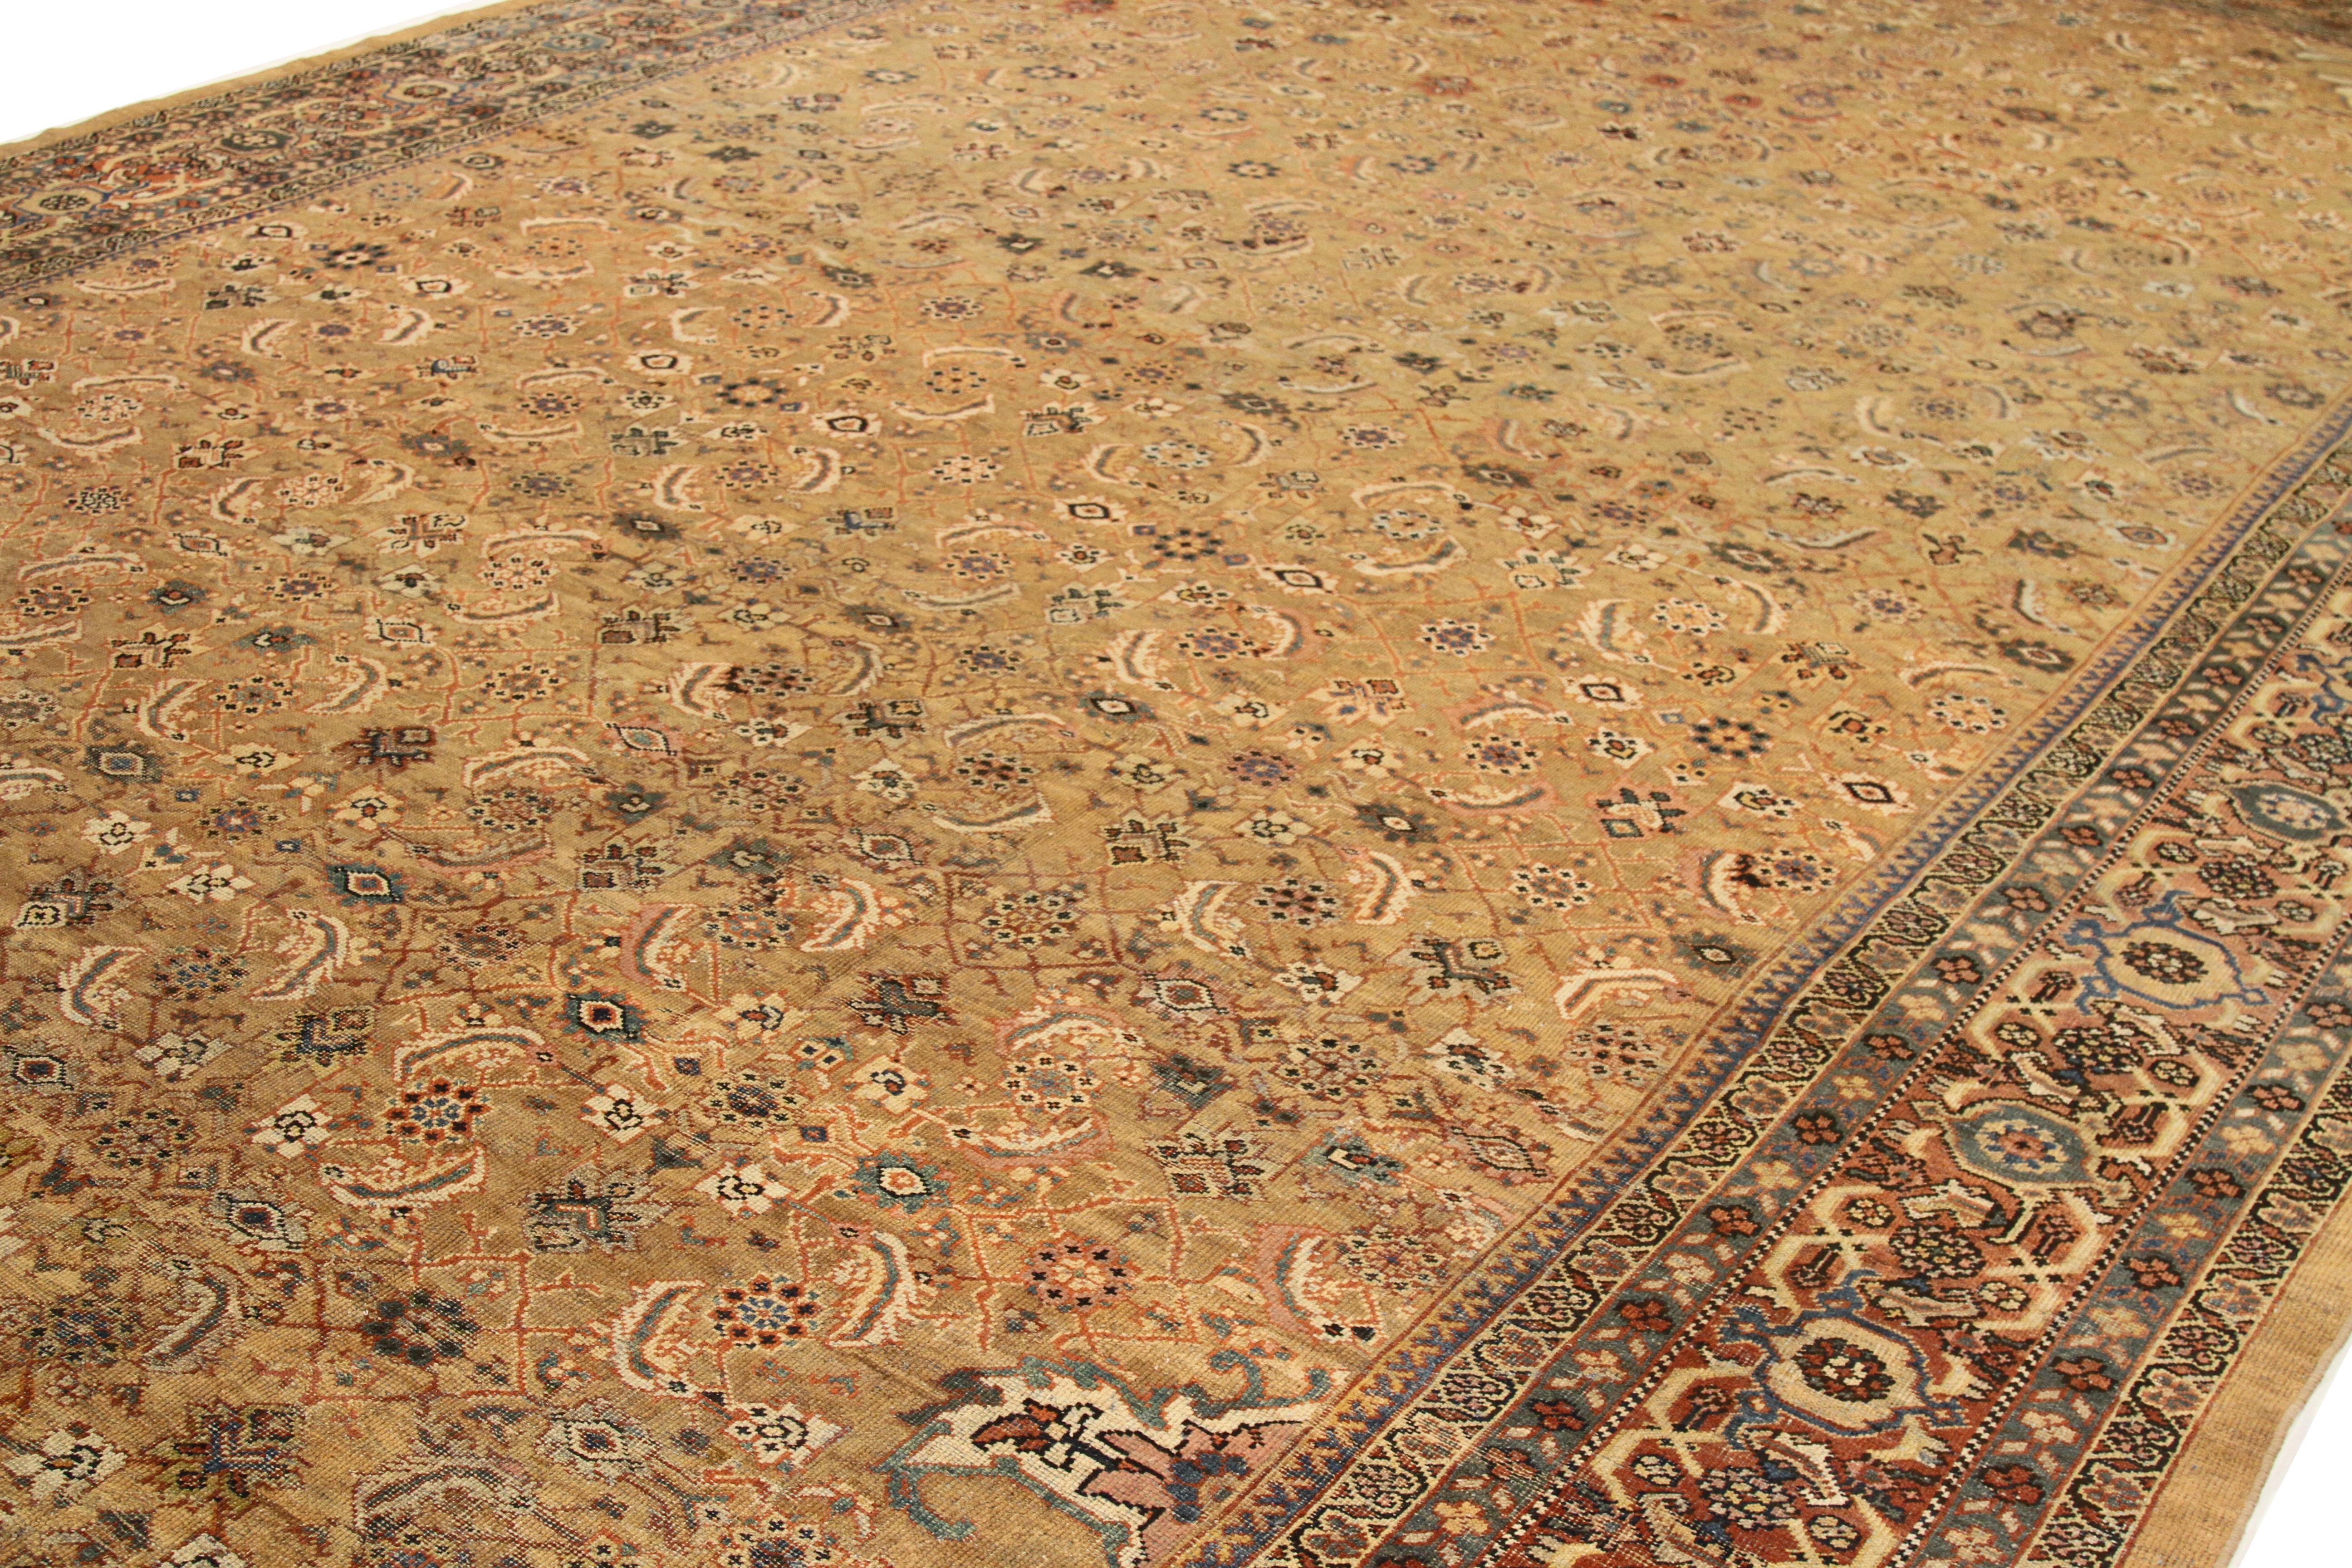 Hand-Woven Oversize Antique Handwoven Persian Area Rug Sultanabad Design For Sale